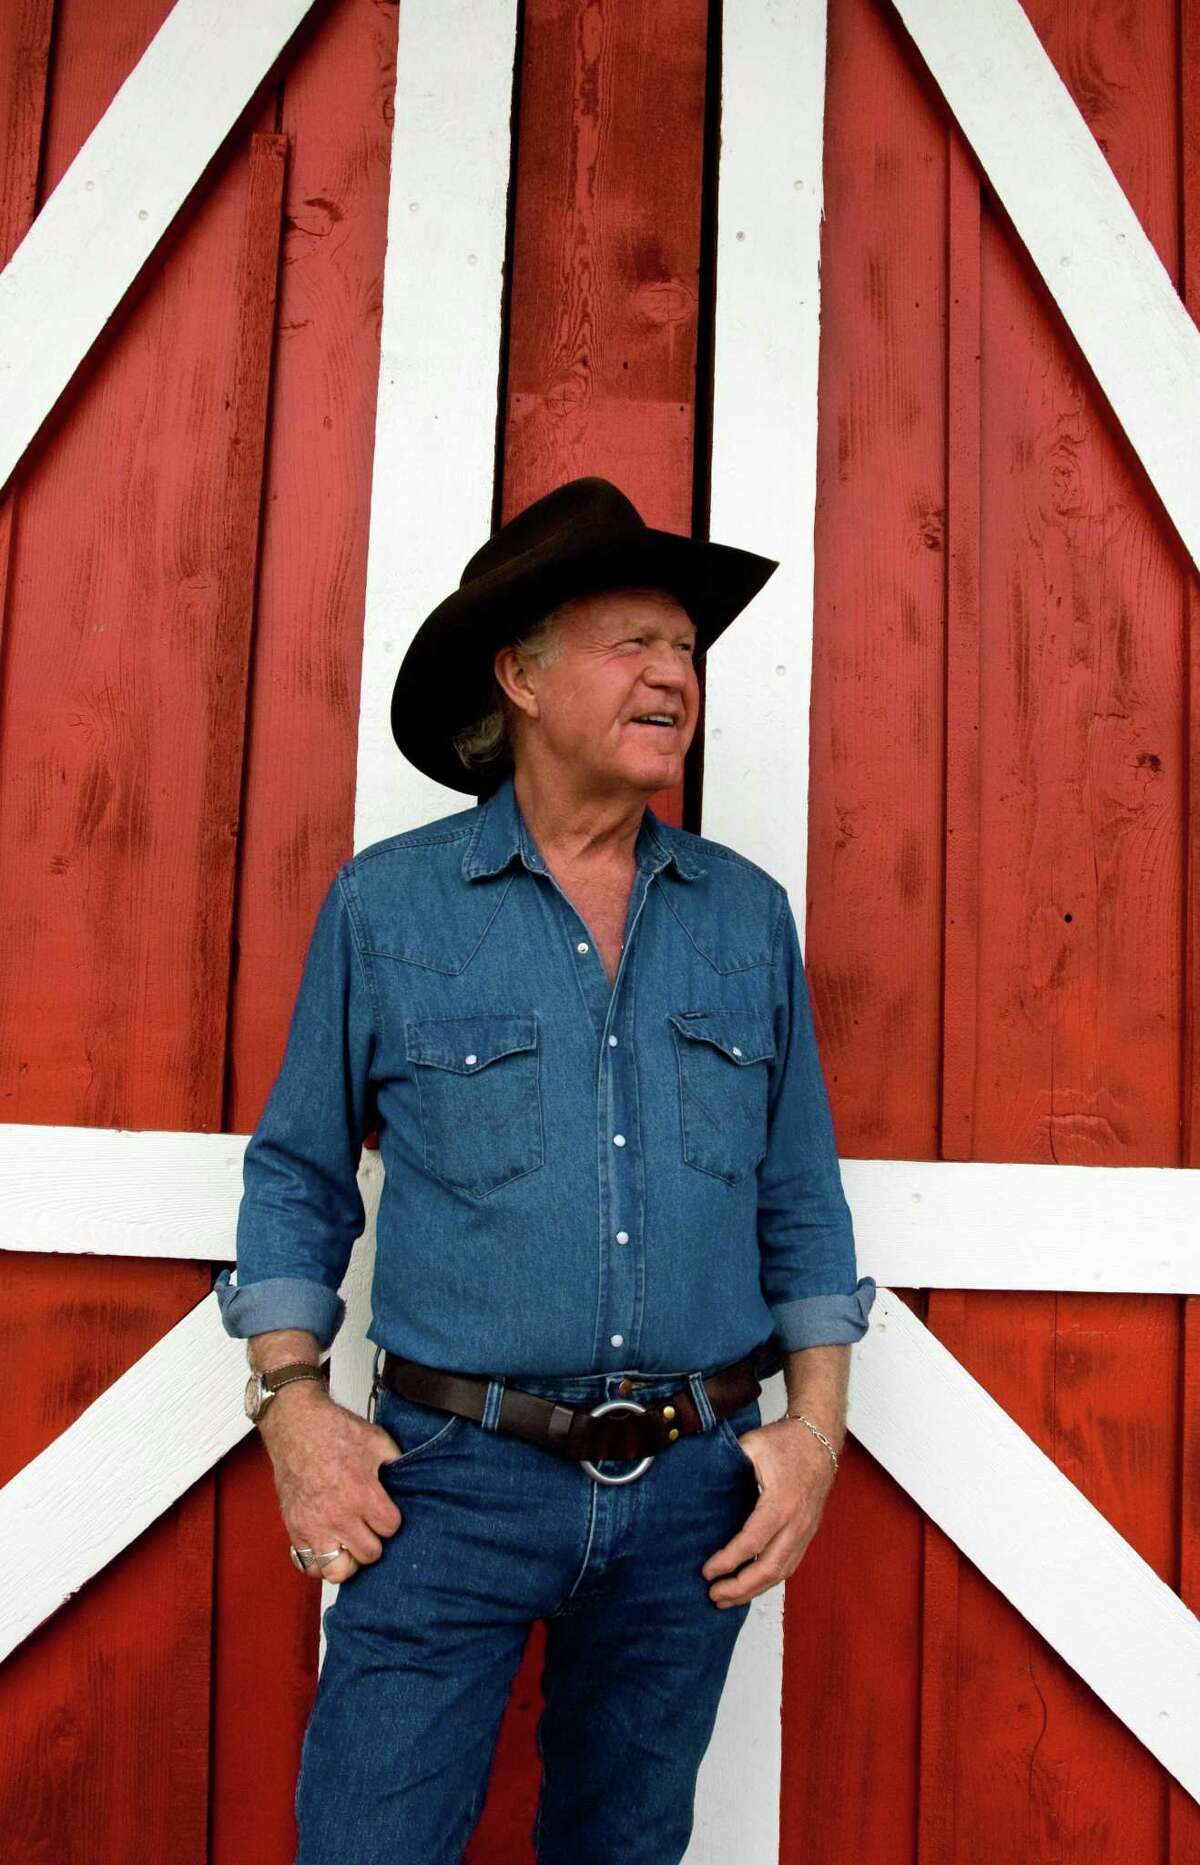 Billy Joe Shaver, 68, a prolific songwriter living in Waco, Texas, poses outside the Leon Springs Dance Hall in San Antonio, Texas on Friday, August 17, 2007. His new album, entitled "Everybody's Brother," comes out on August 25, 2007.